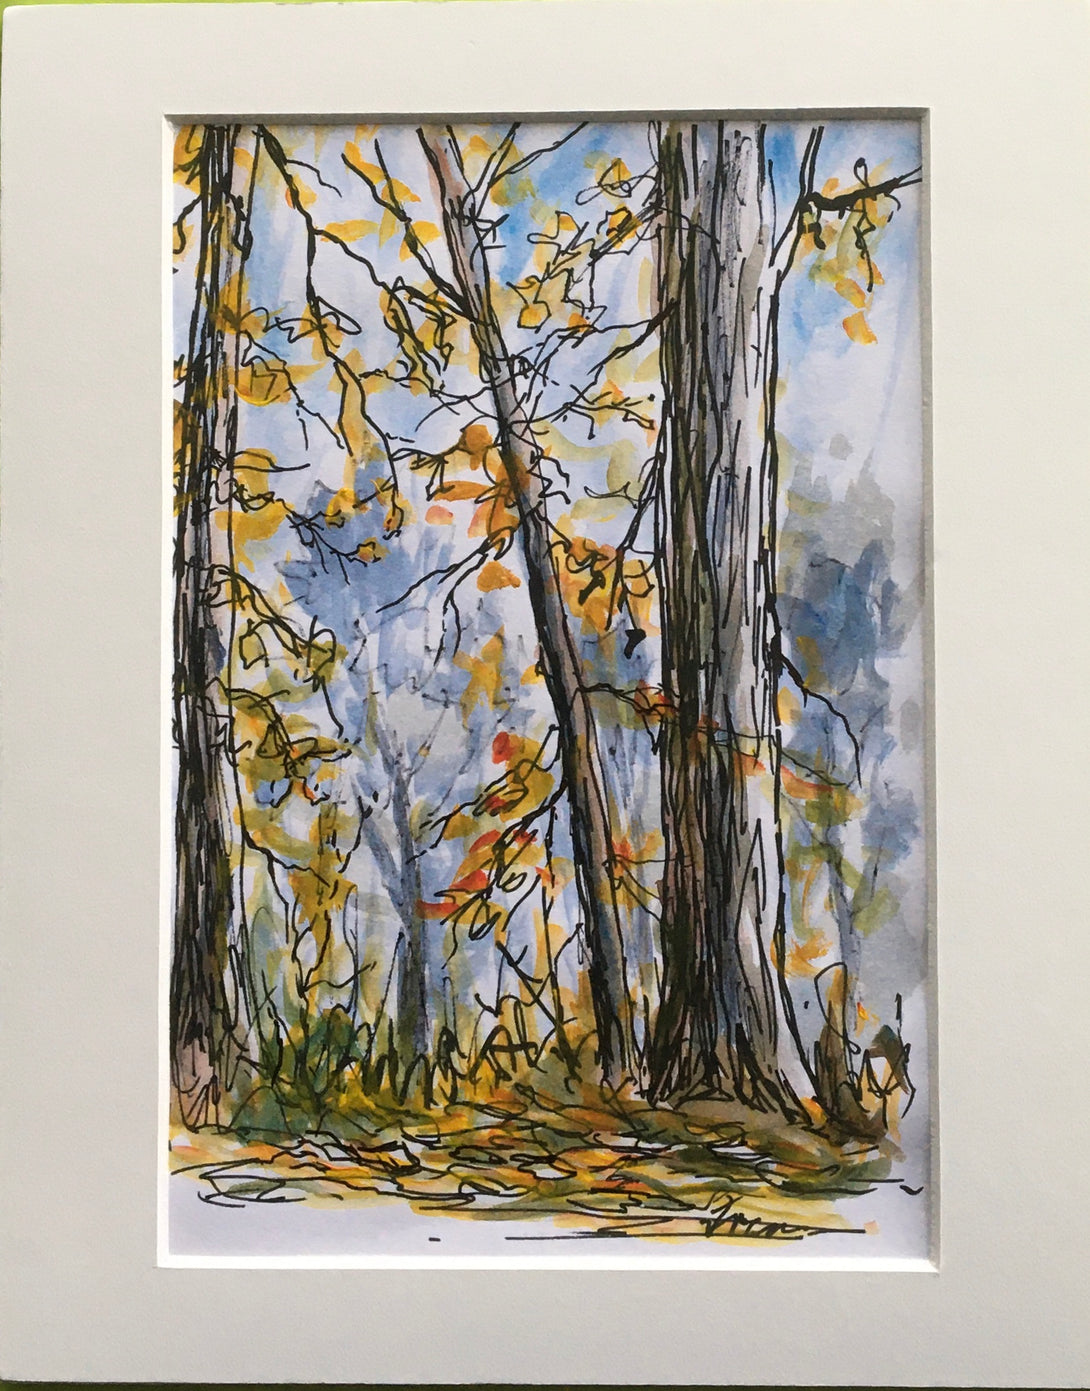 Fran Renwick -Watercolor painting - Orange trees, matted, unframed - Fran Renwick - McMillan Arts Centre Gallery, Gift Shop and Box Office - Vancouver Island Art Gallery